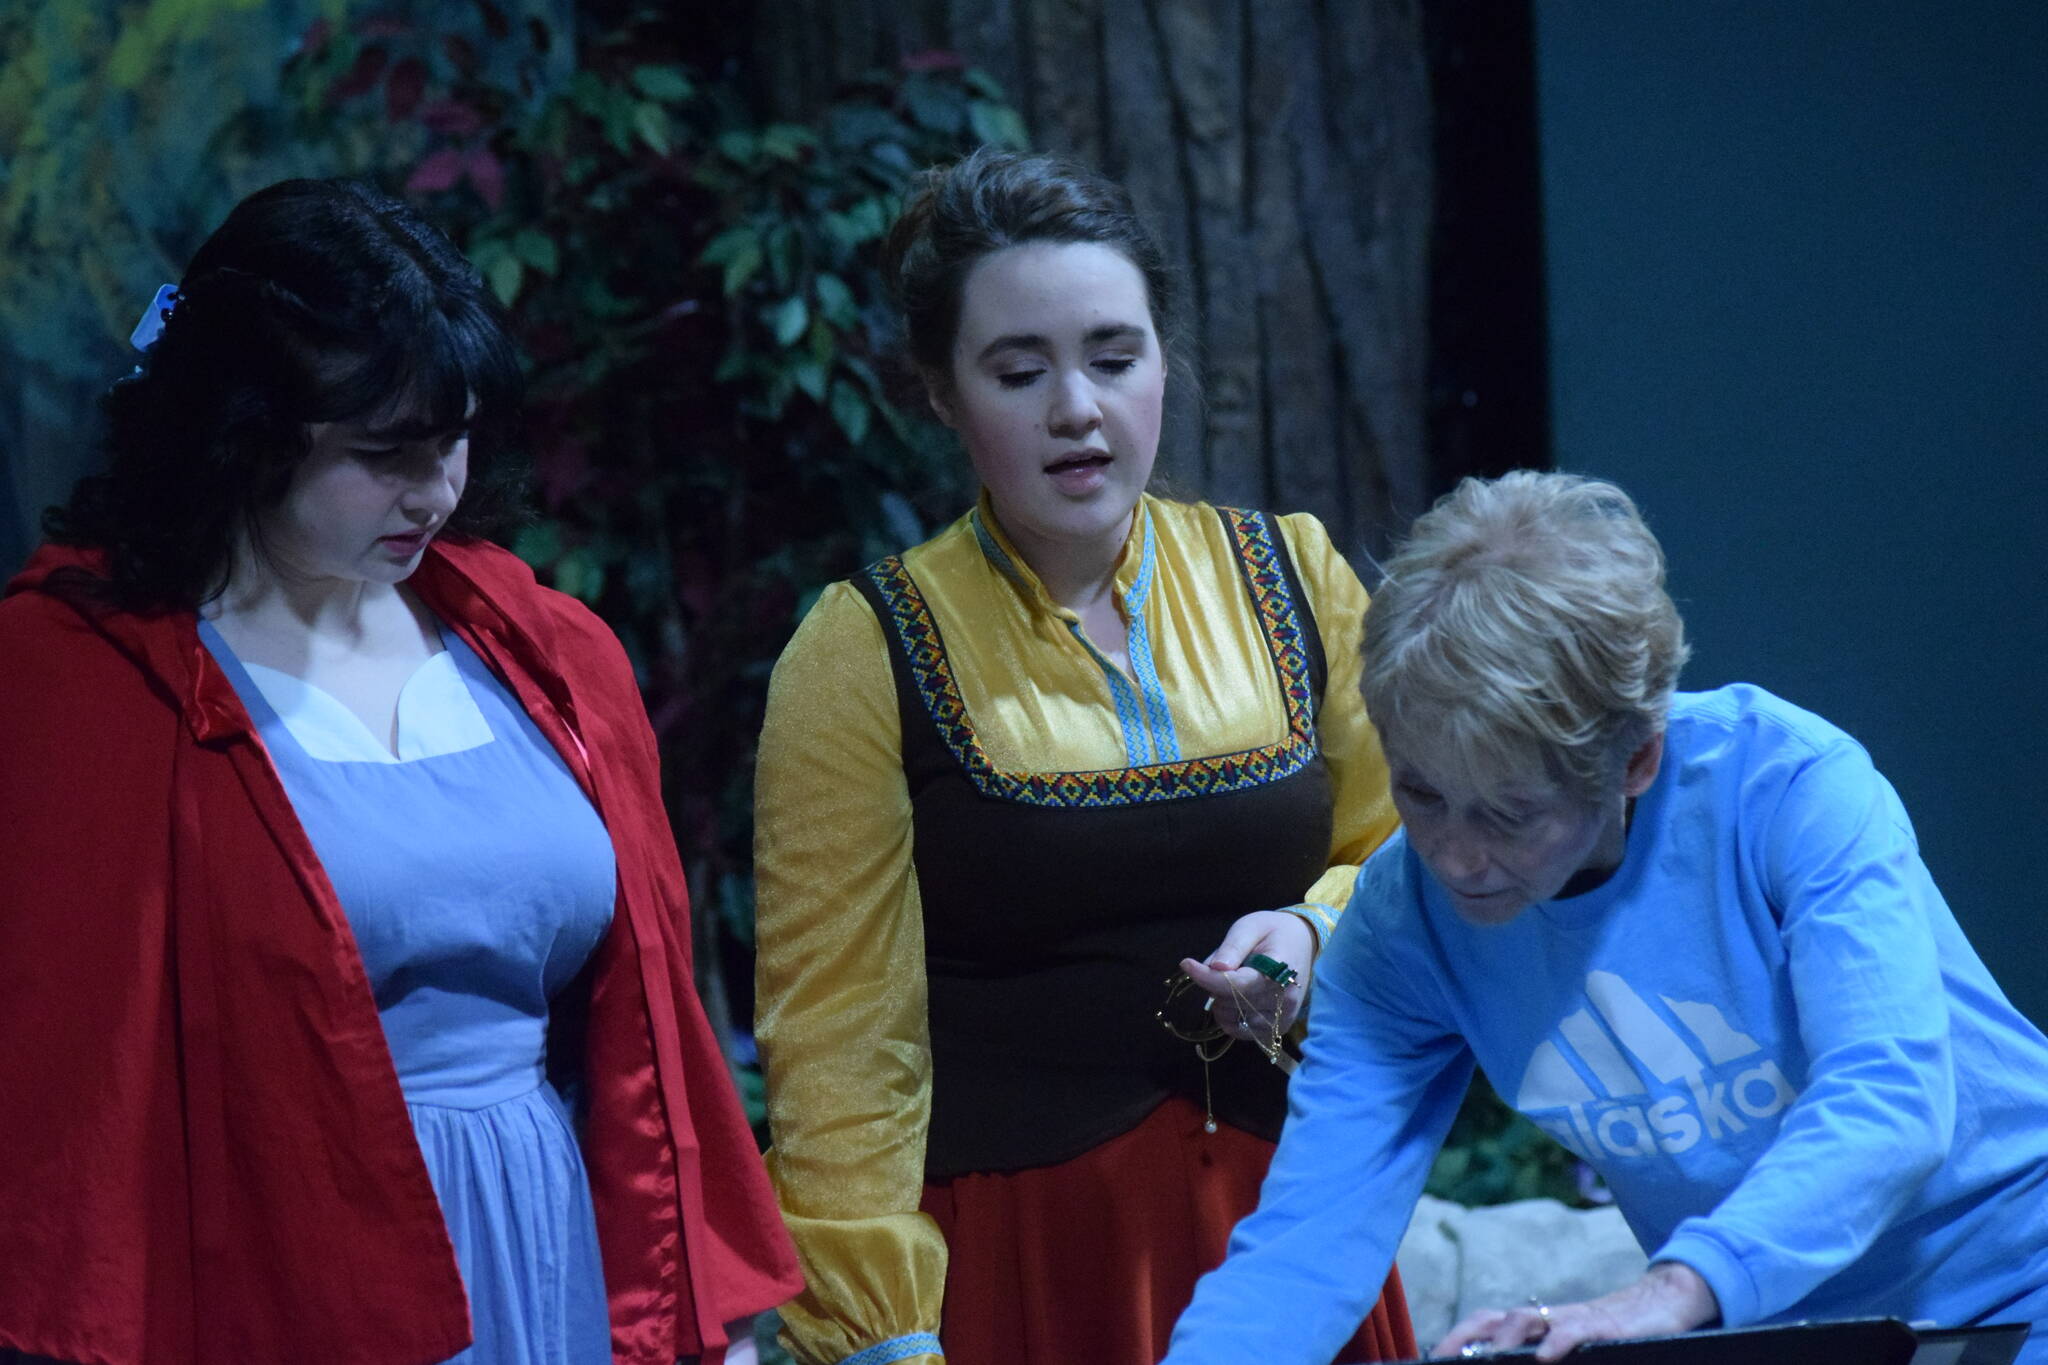 Charli Byrd (left) and Selia Butler, who play Little Red Ridinghood and the Baker’s Wife in “Into the Woods,” run through voice exercises with vocal director Rosemary Bird at the Kenai Performers building in Soldotna, Alaska, on Monday, March 14, 2022. (Camille Botello/Peninsula Clarion)